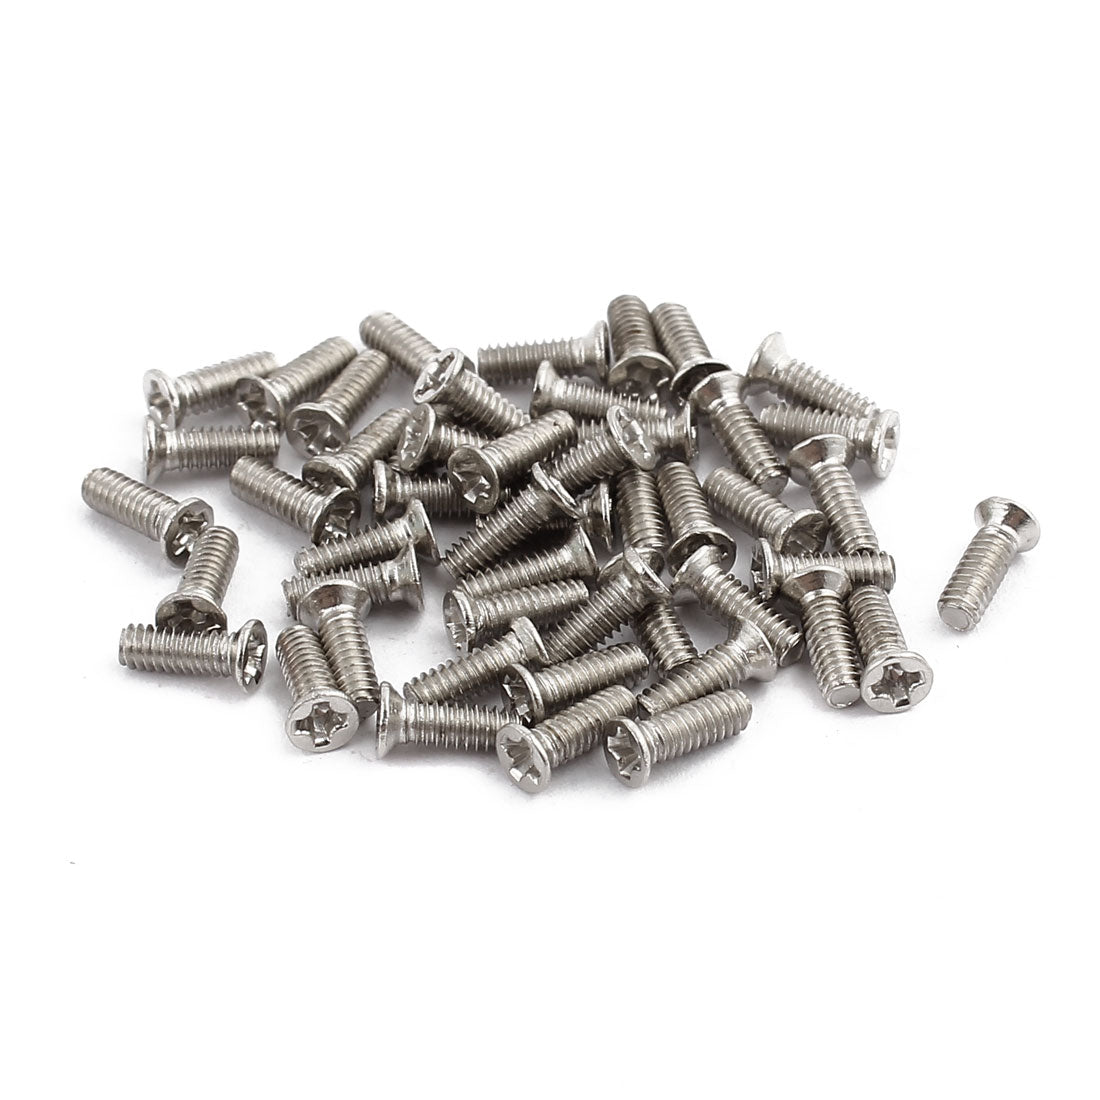 uxcell Uxcell 50Pcs M2 x 5mm Stainless Steel Countersunk Flat Head Phillips Machine Screw